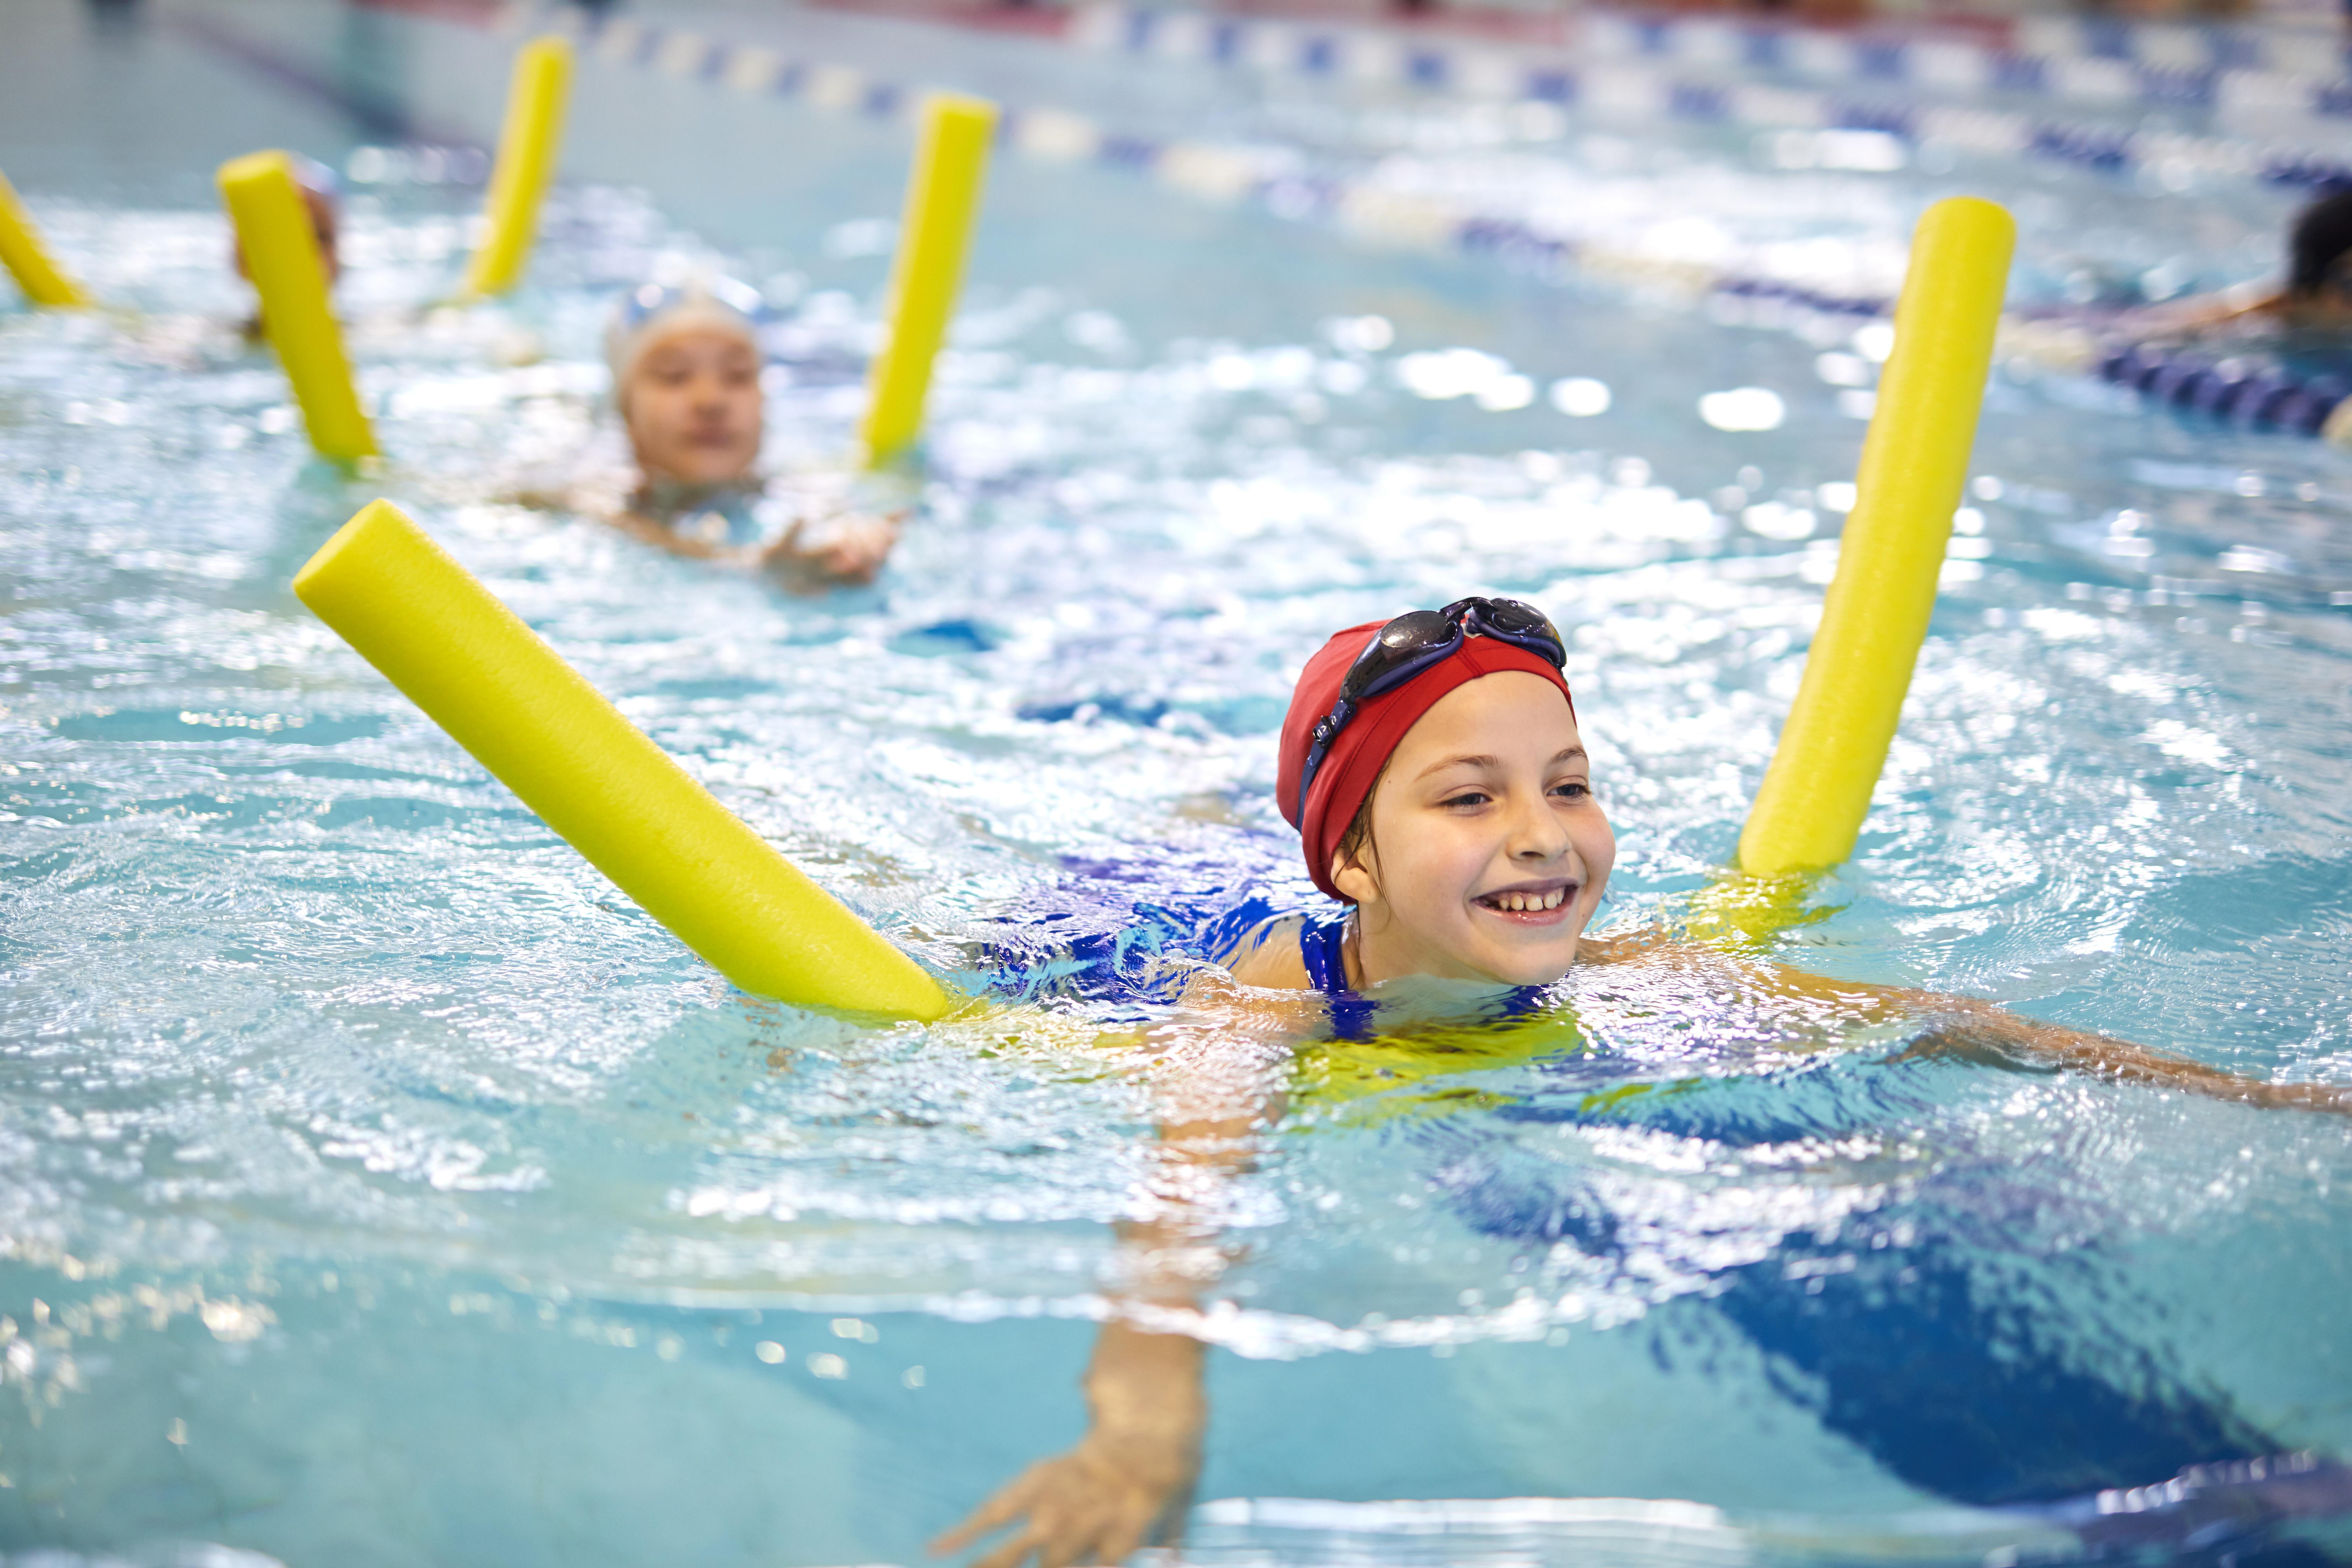 Free swimming lessons and family fun swim sessions during the school summer holidays